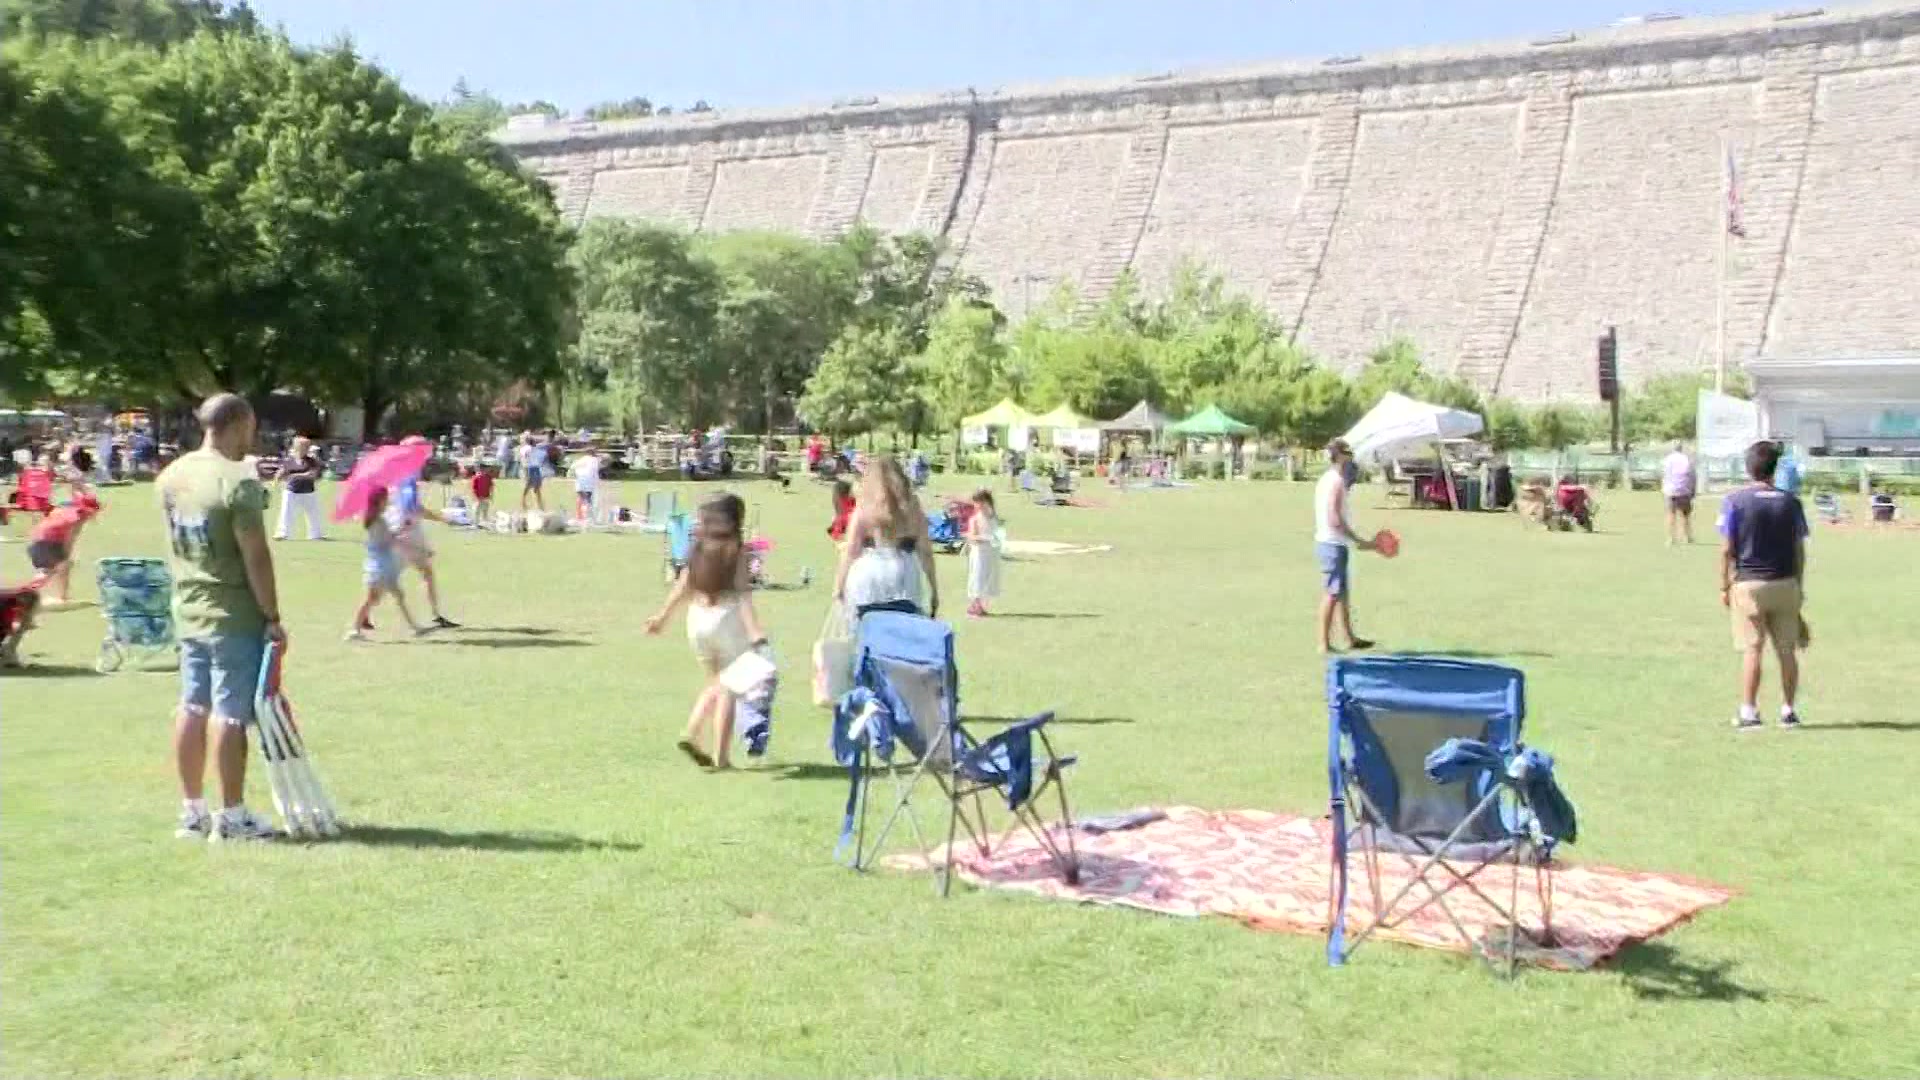 Thousands flock to Kensico Dam Plaza to enjoy food, live music and July